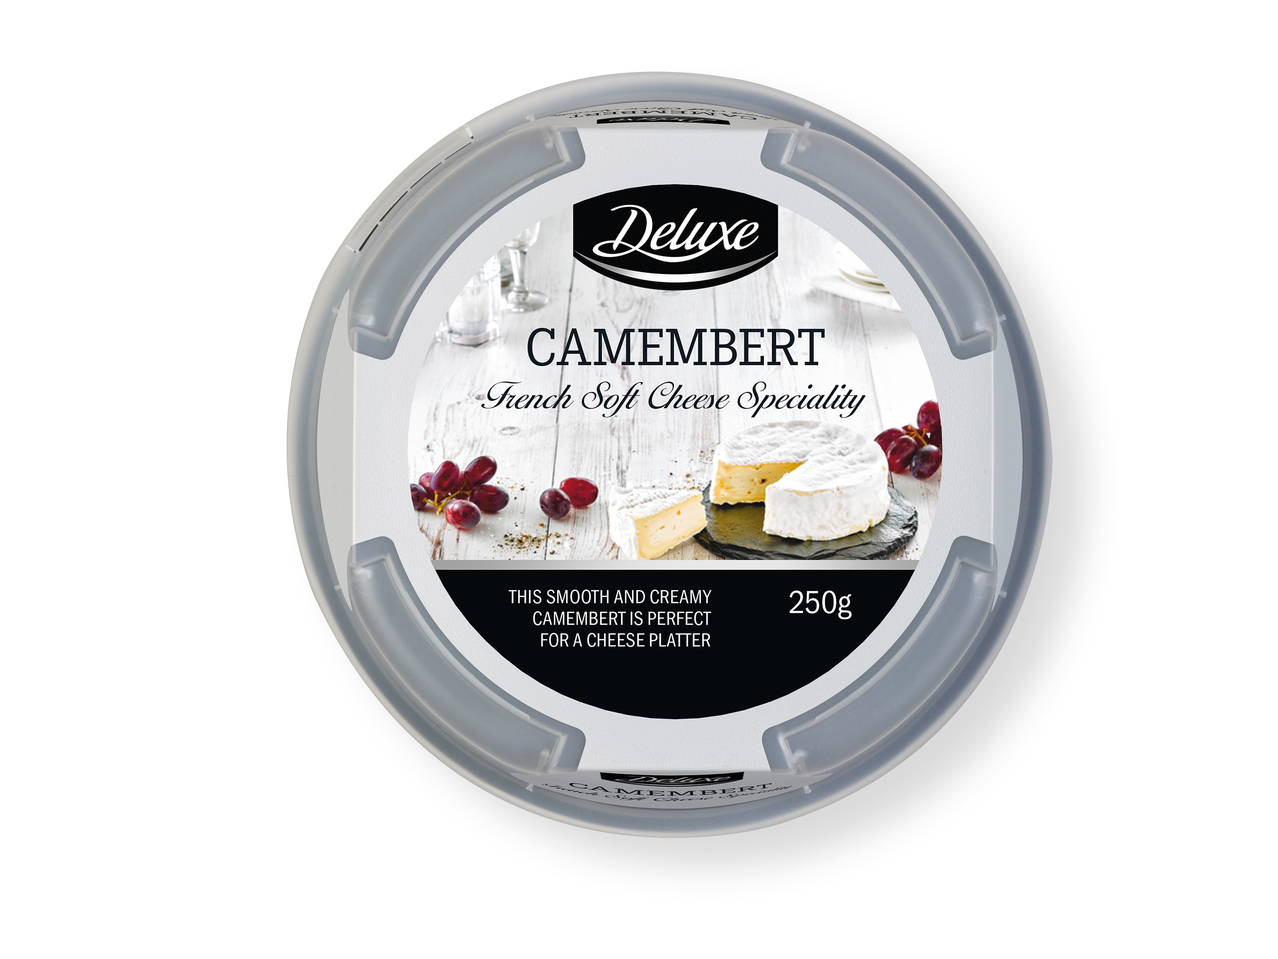 'Deluxe(R)' Queso camembert